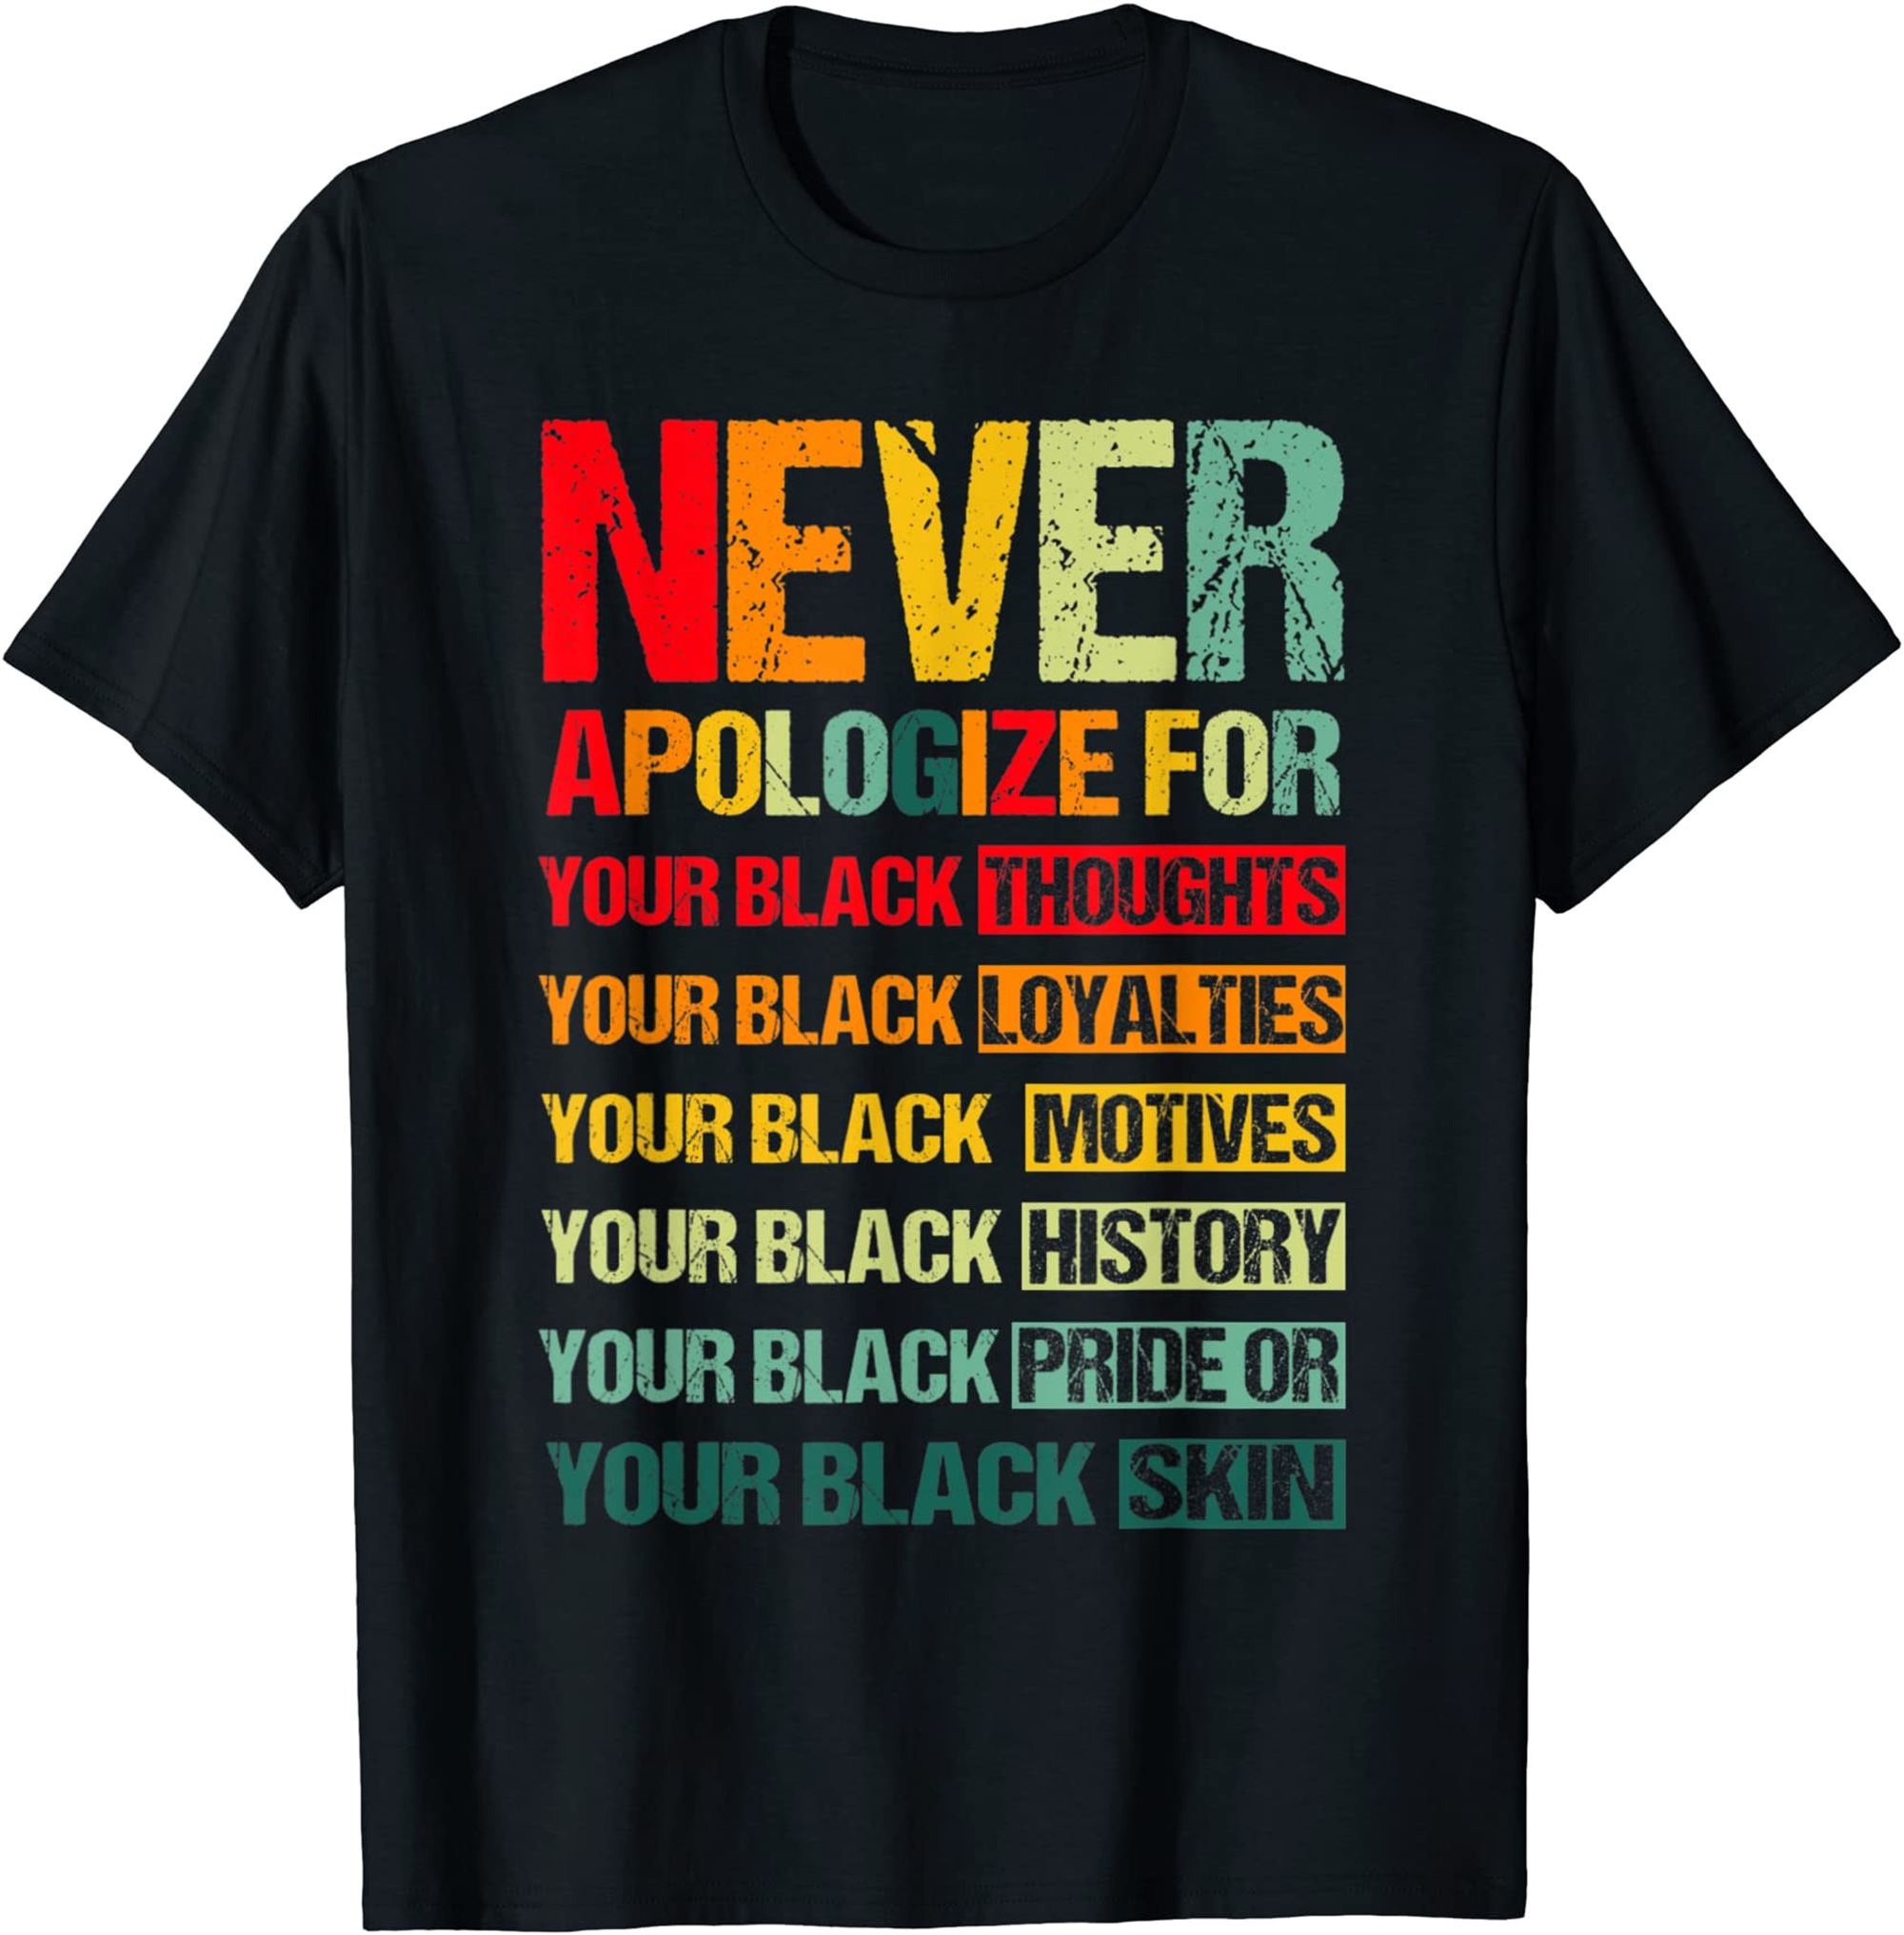 Never Apologize For Your Blackness Juneteenth Freedom 1865 T-shirt Full Size Up To 5xl